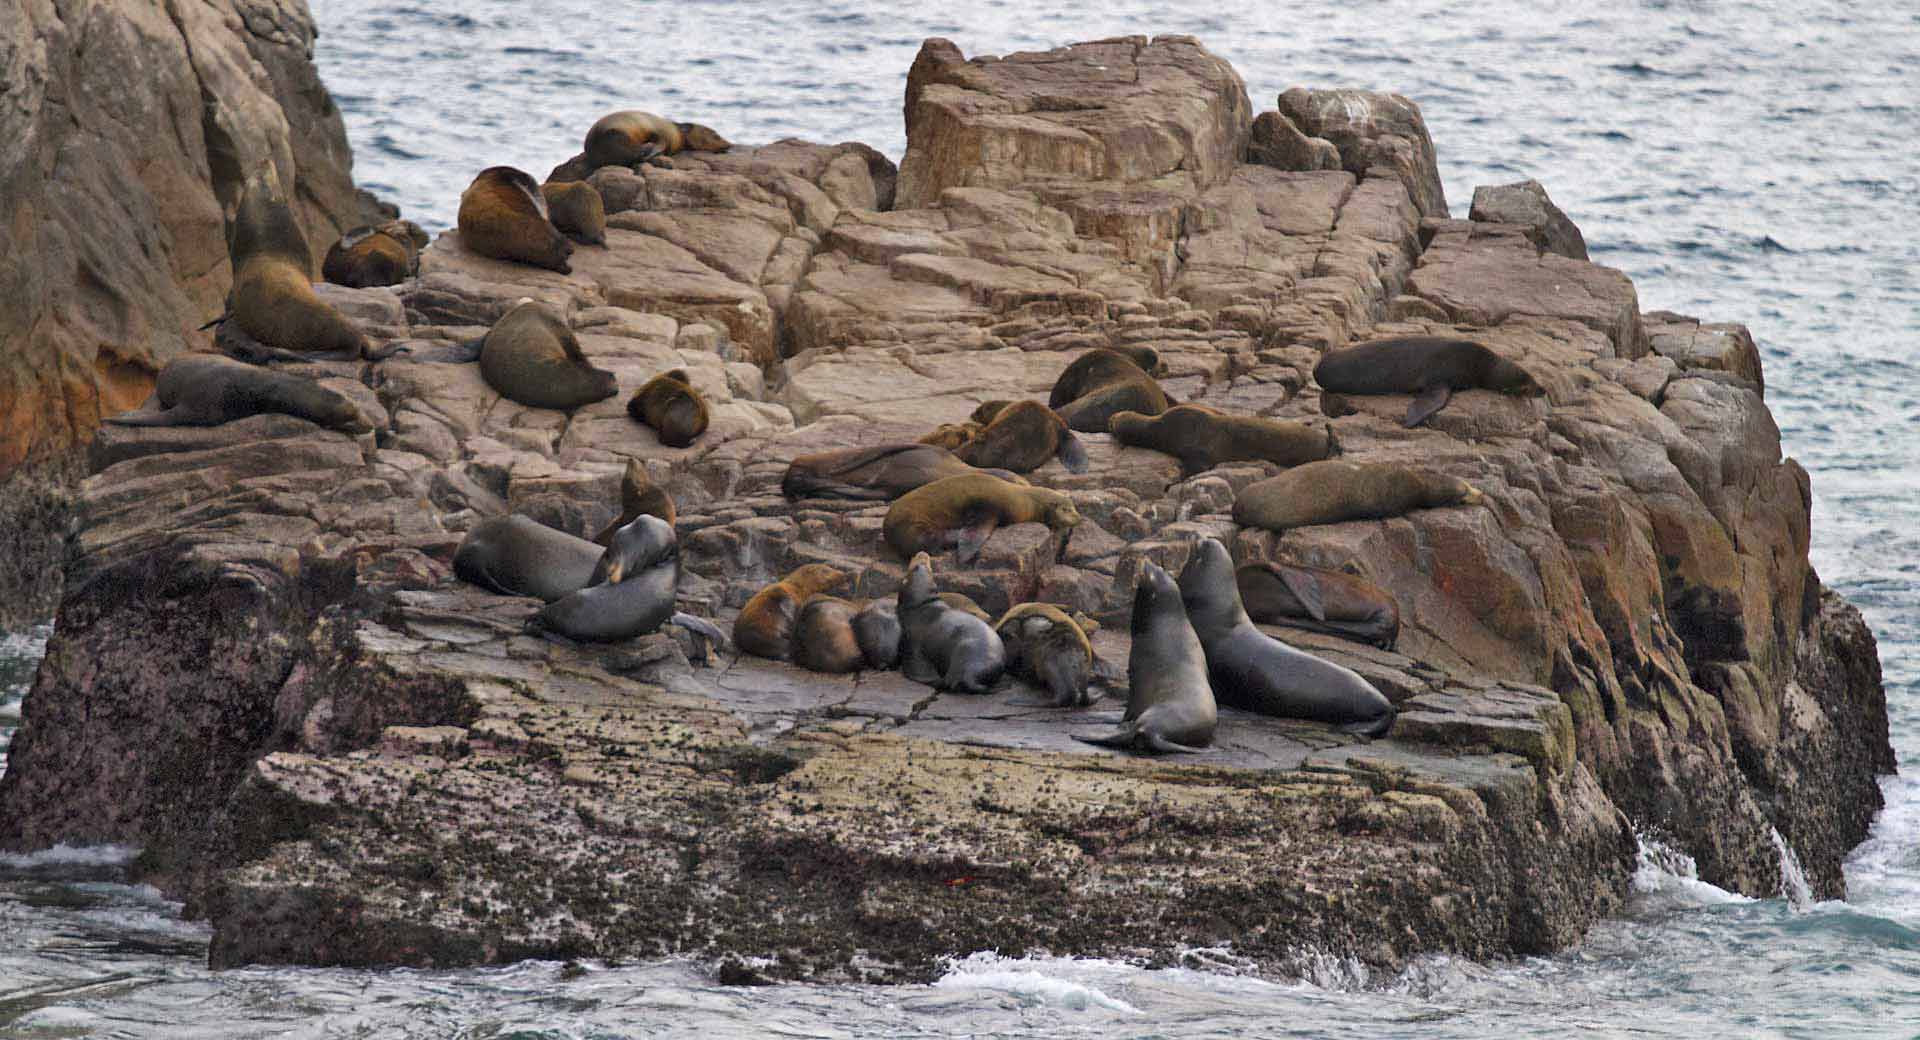 Sea lions at Land's End, Cabo